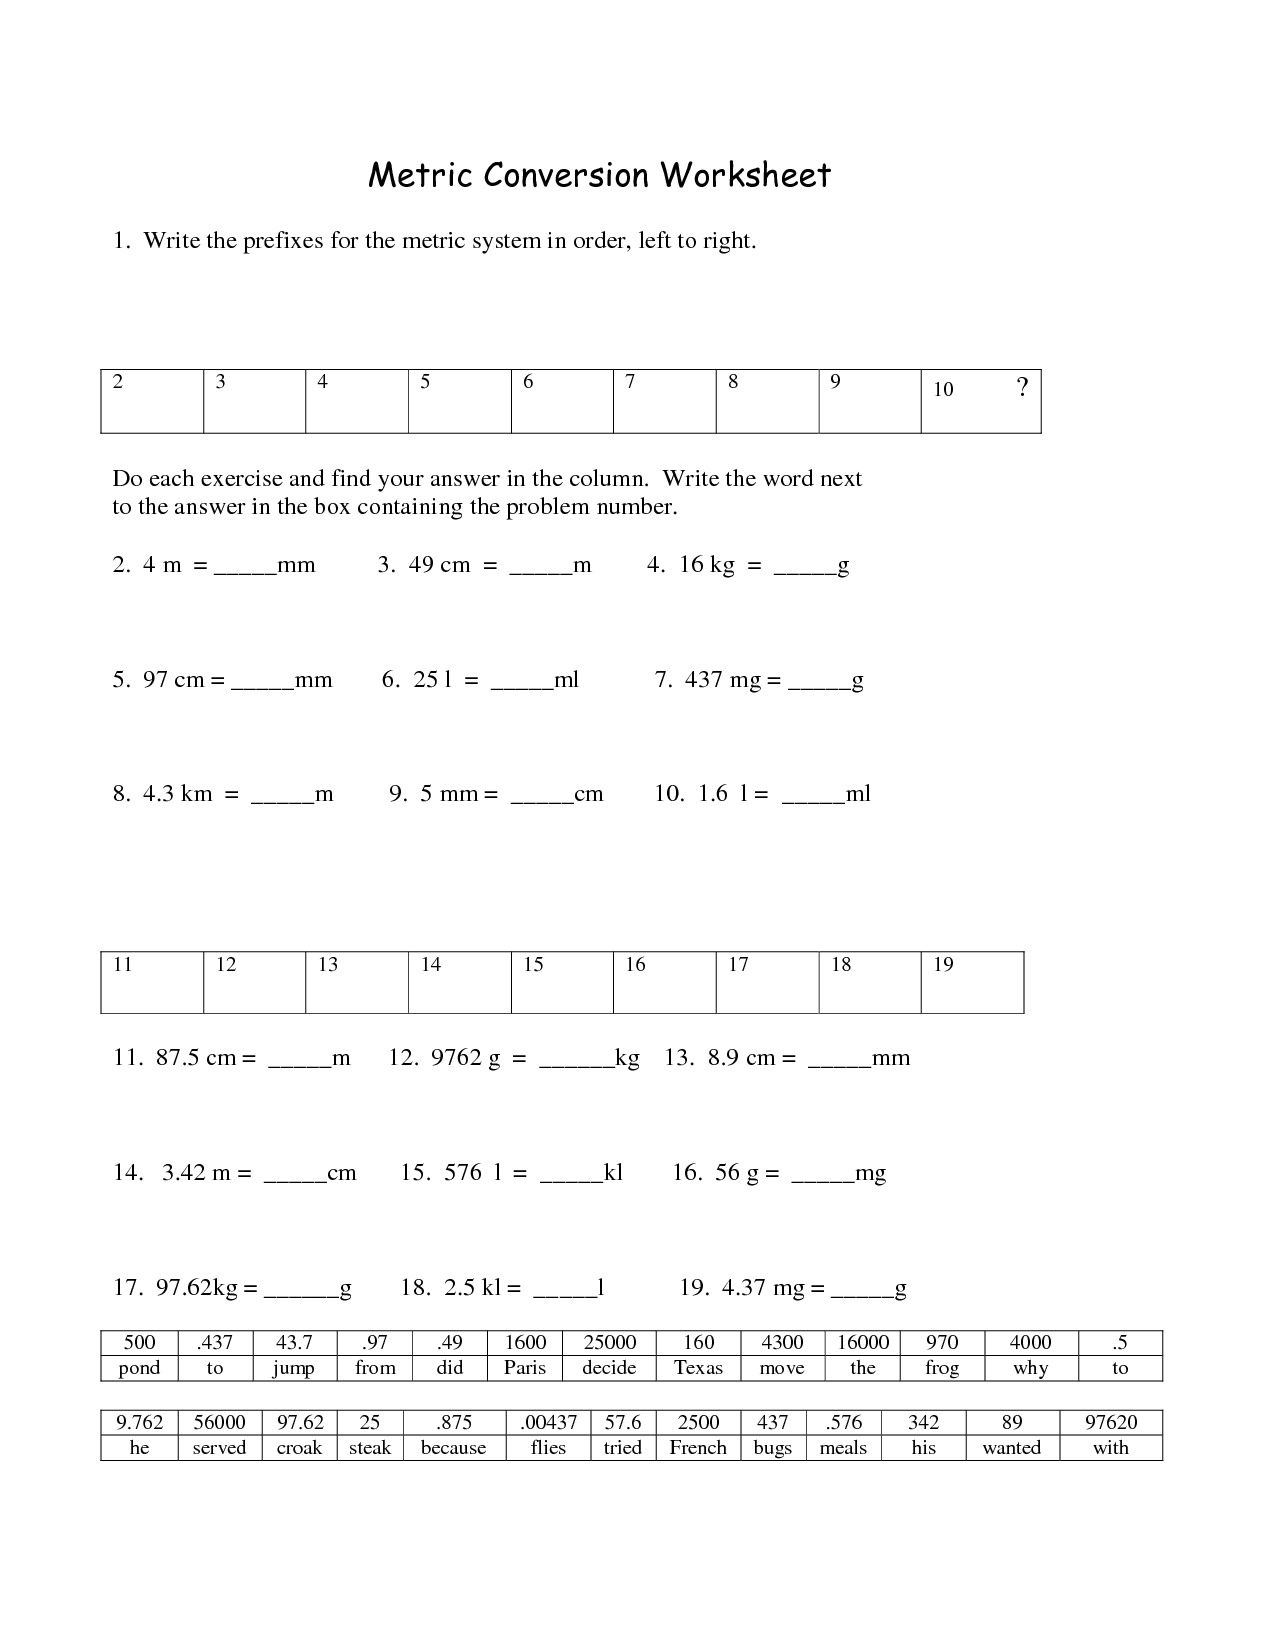 17-best-images-of-metric-to-metric-conversion-worksheets-metric-unit-conversion-worksheet